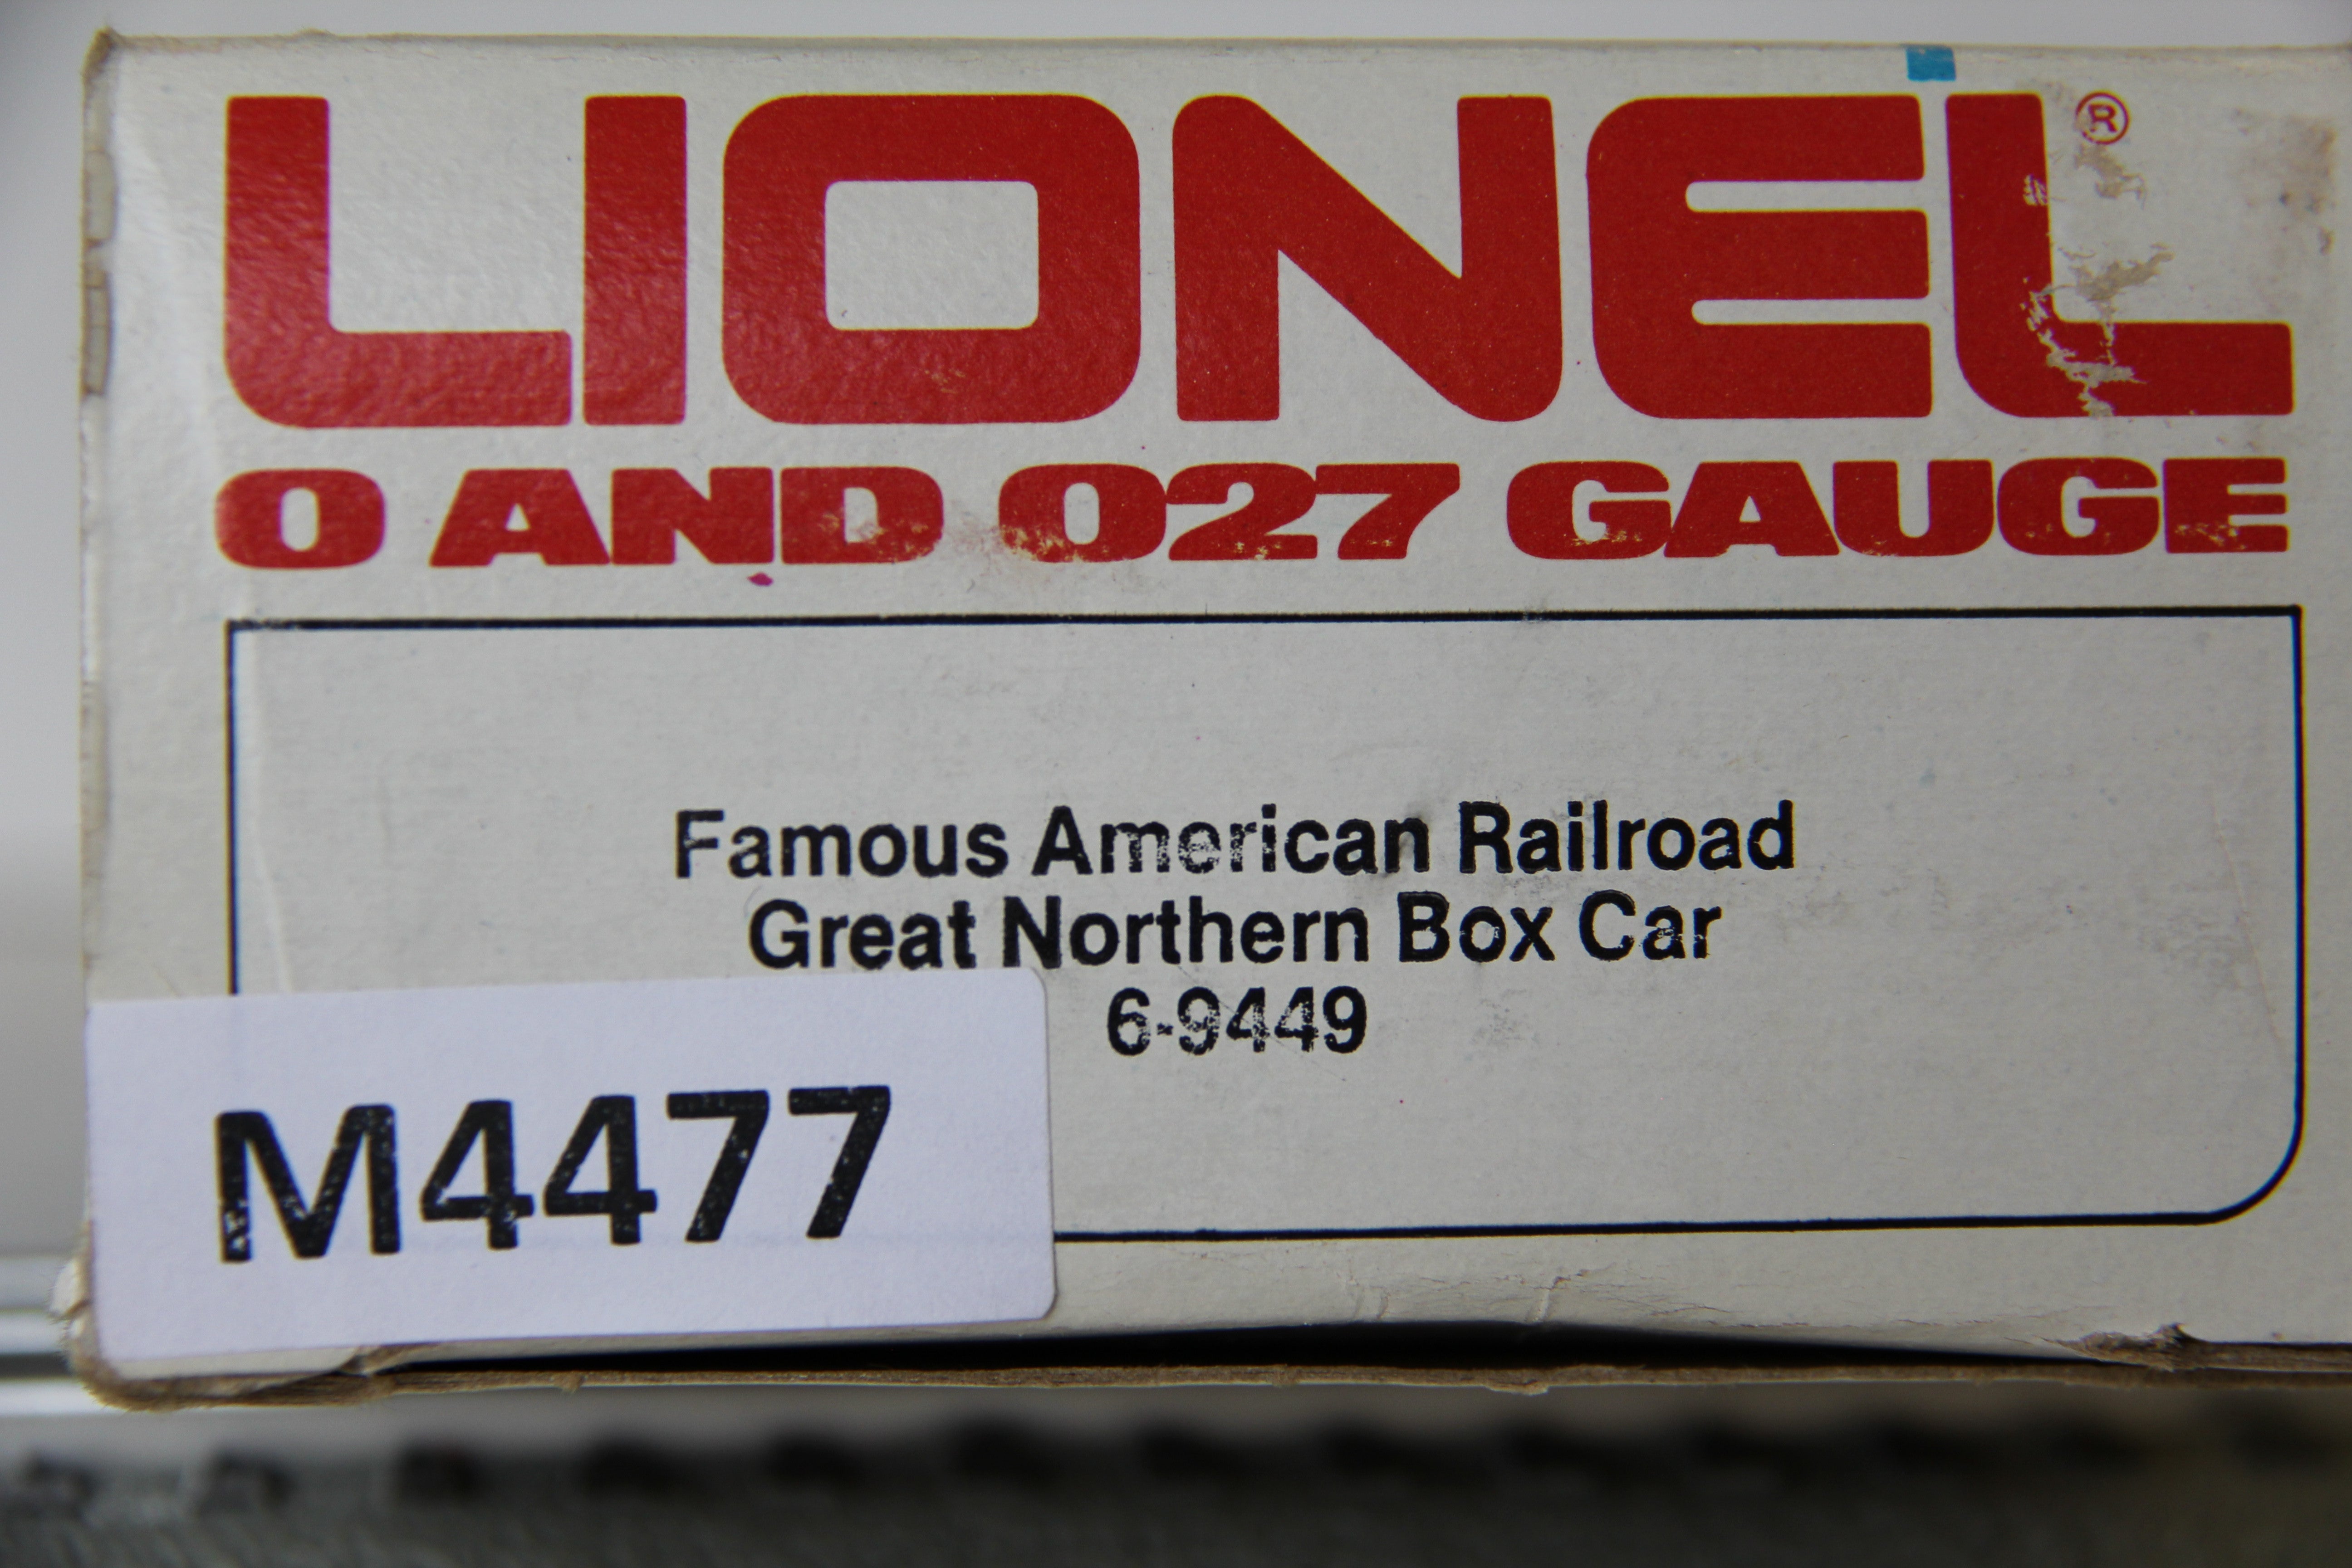 Lionel 6-9449 Famous American Railroad Great Northern Box Car-Second hand-M4477